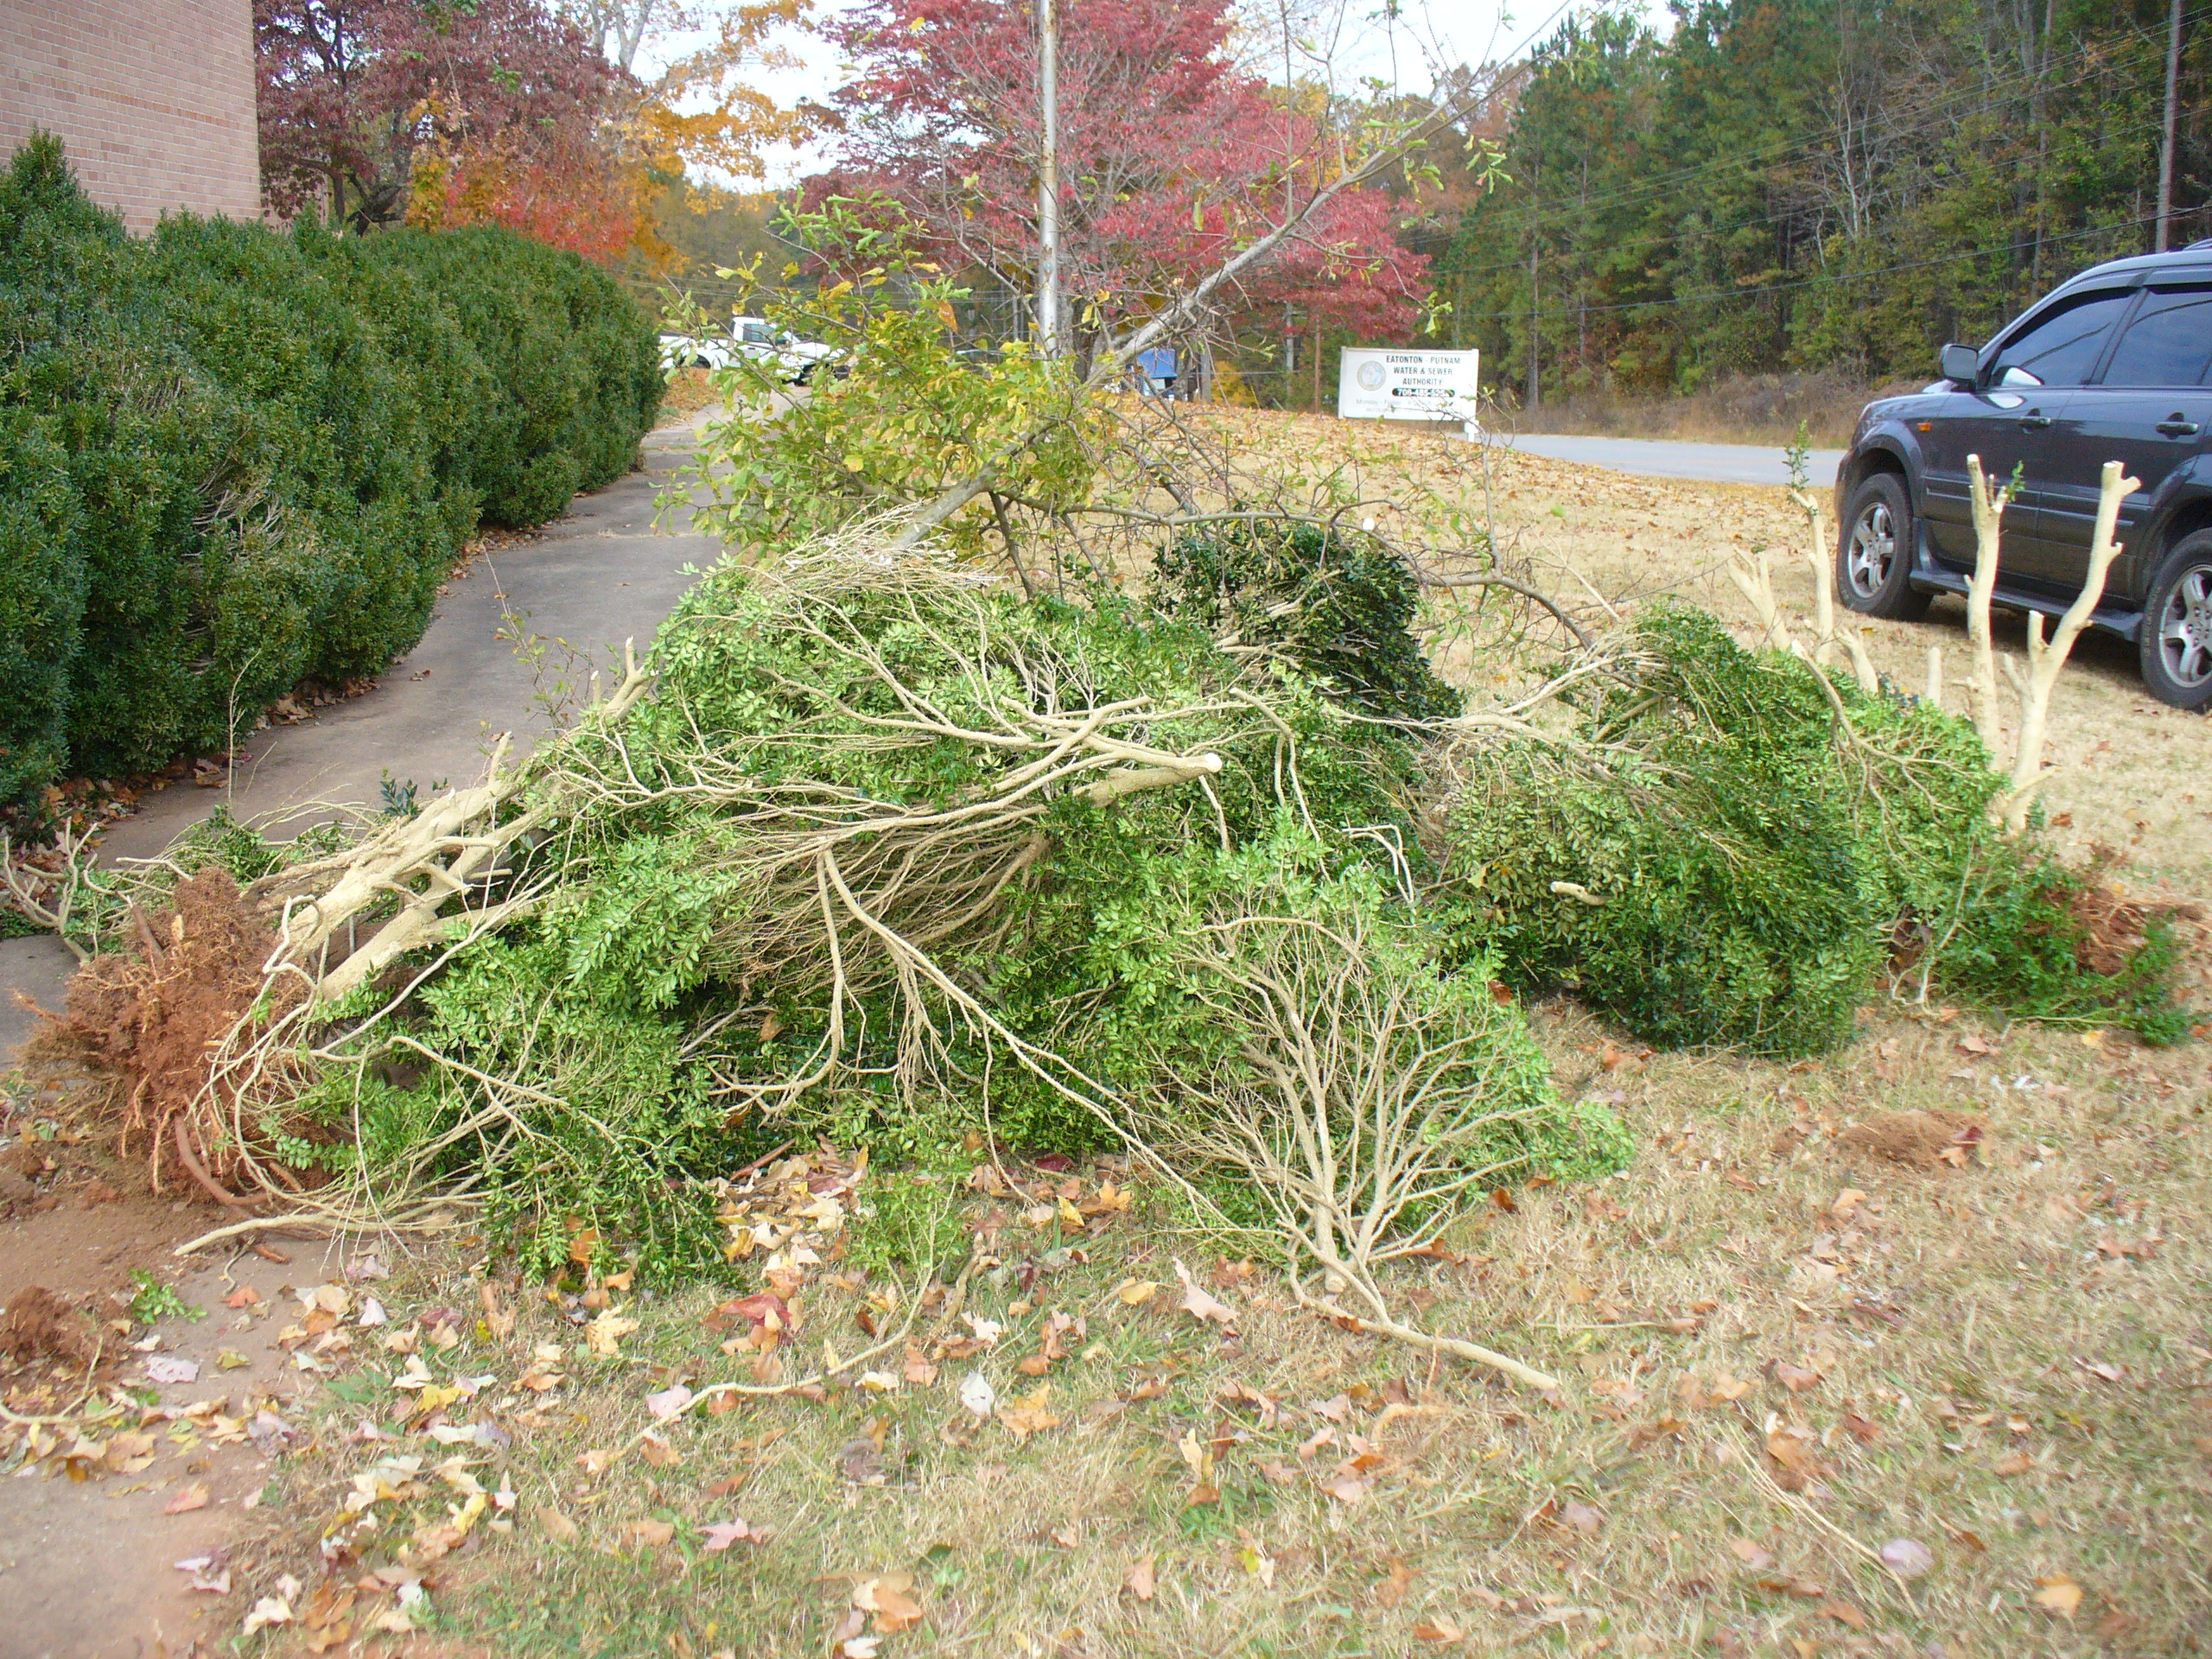 Bushes removed from a landscaping bed